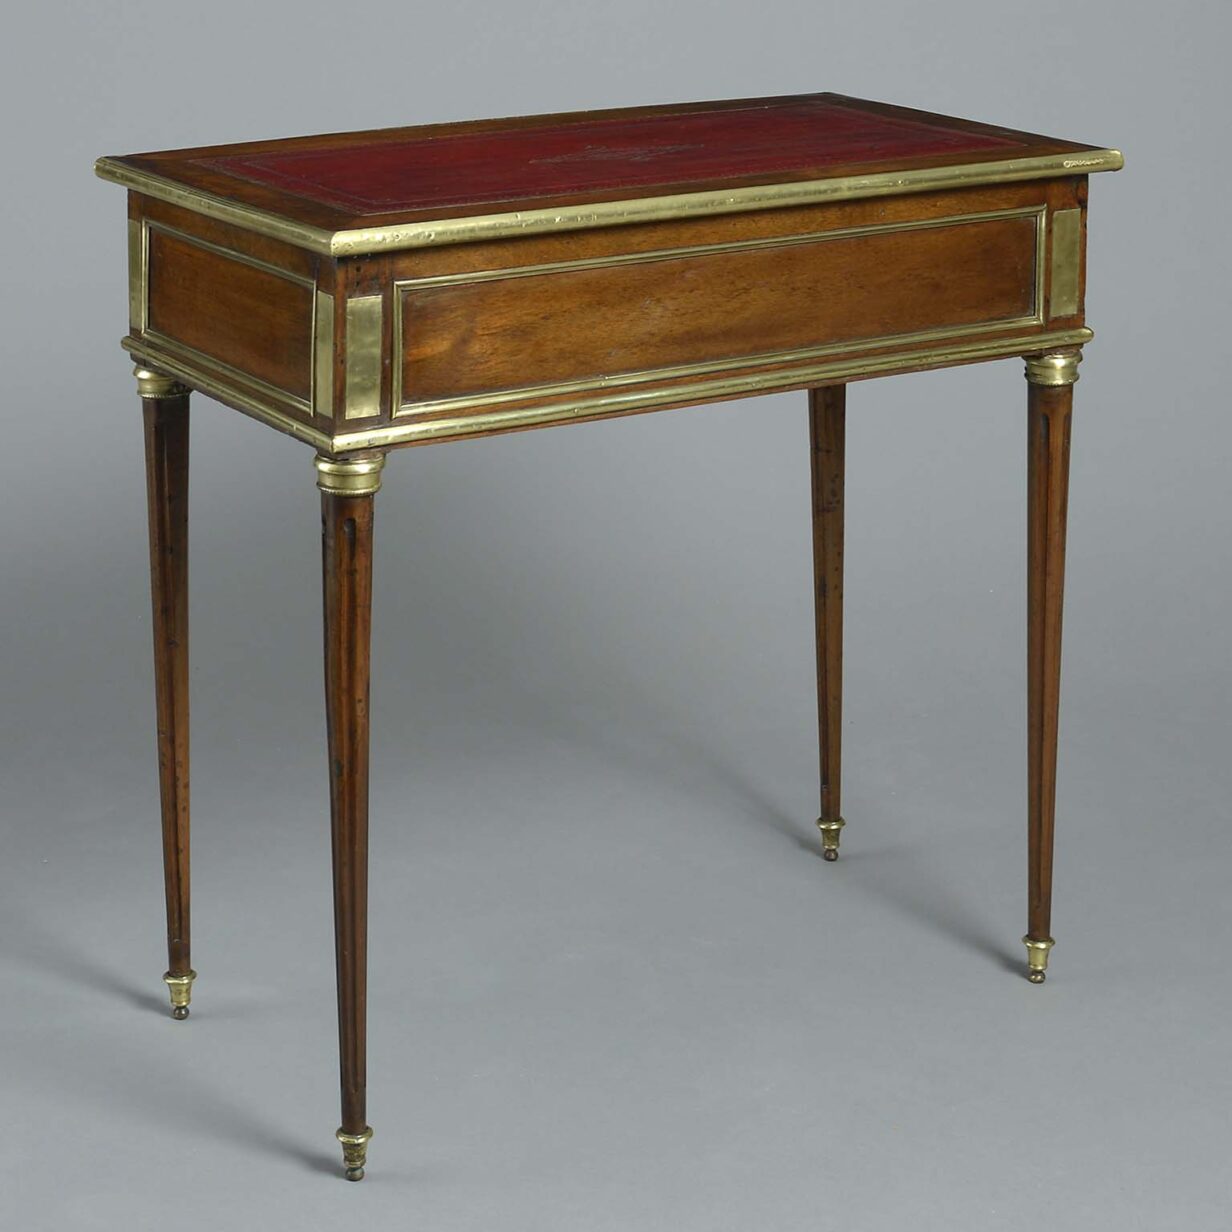 Late 19th century small scale brass mounted writing table